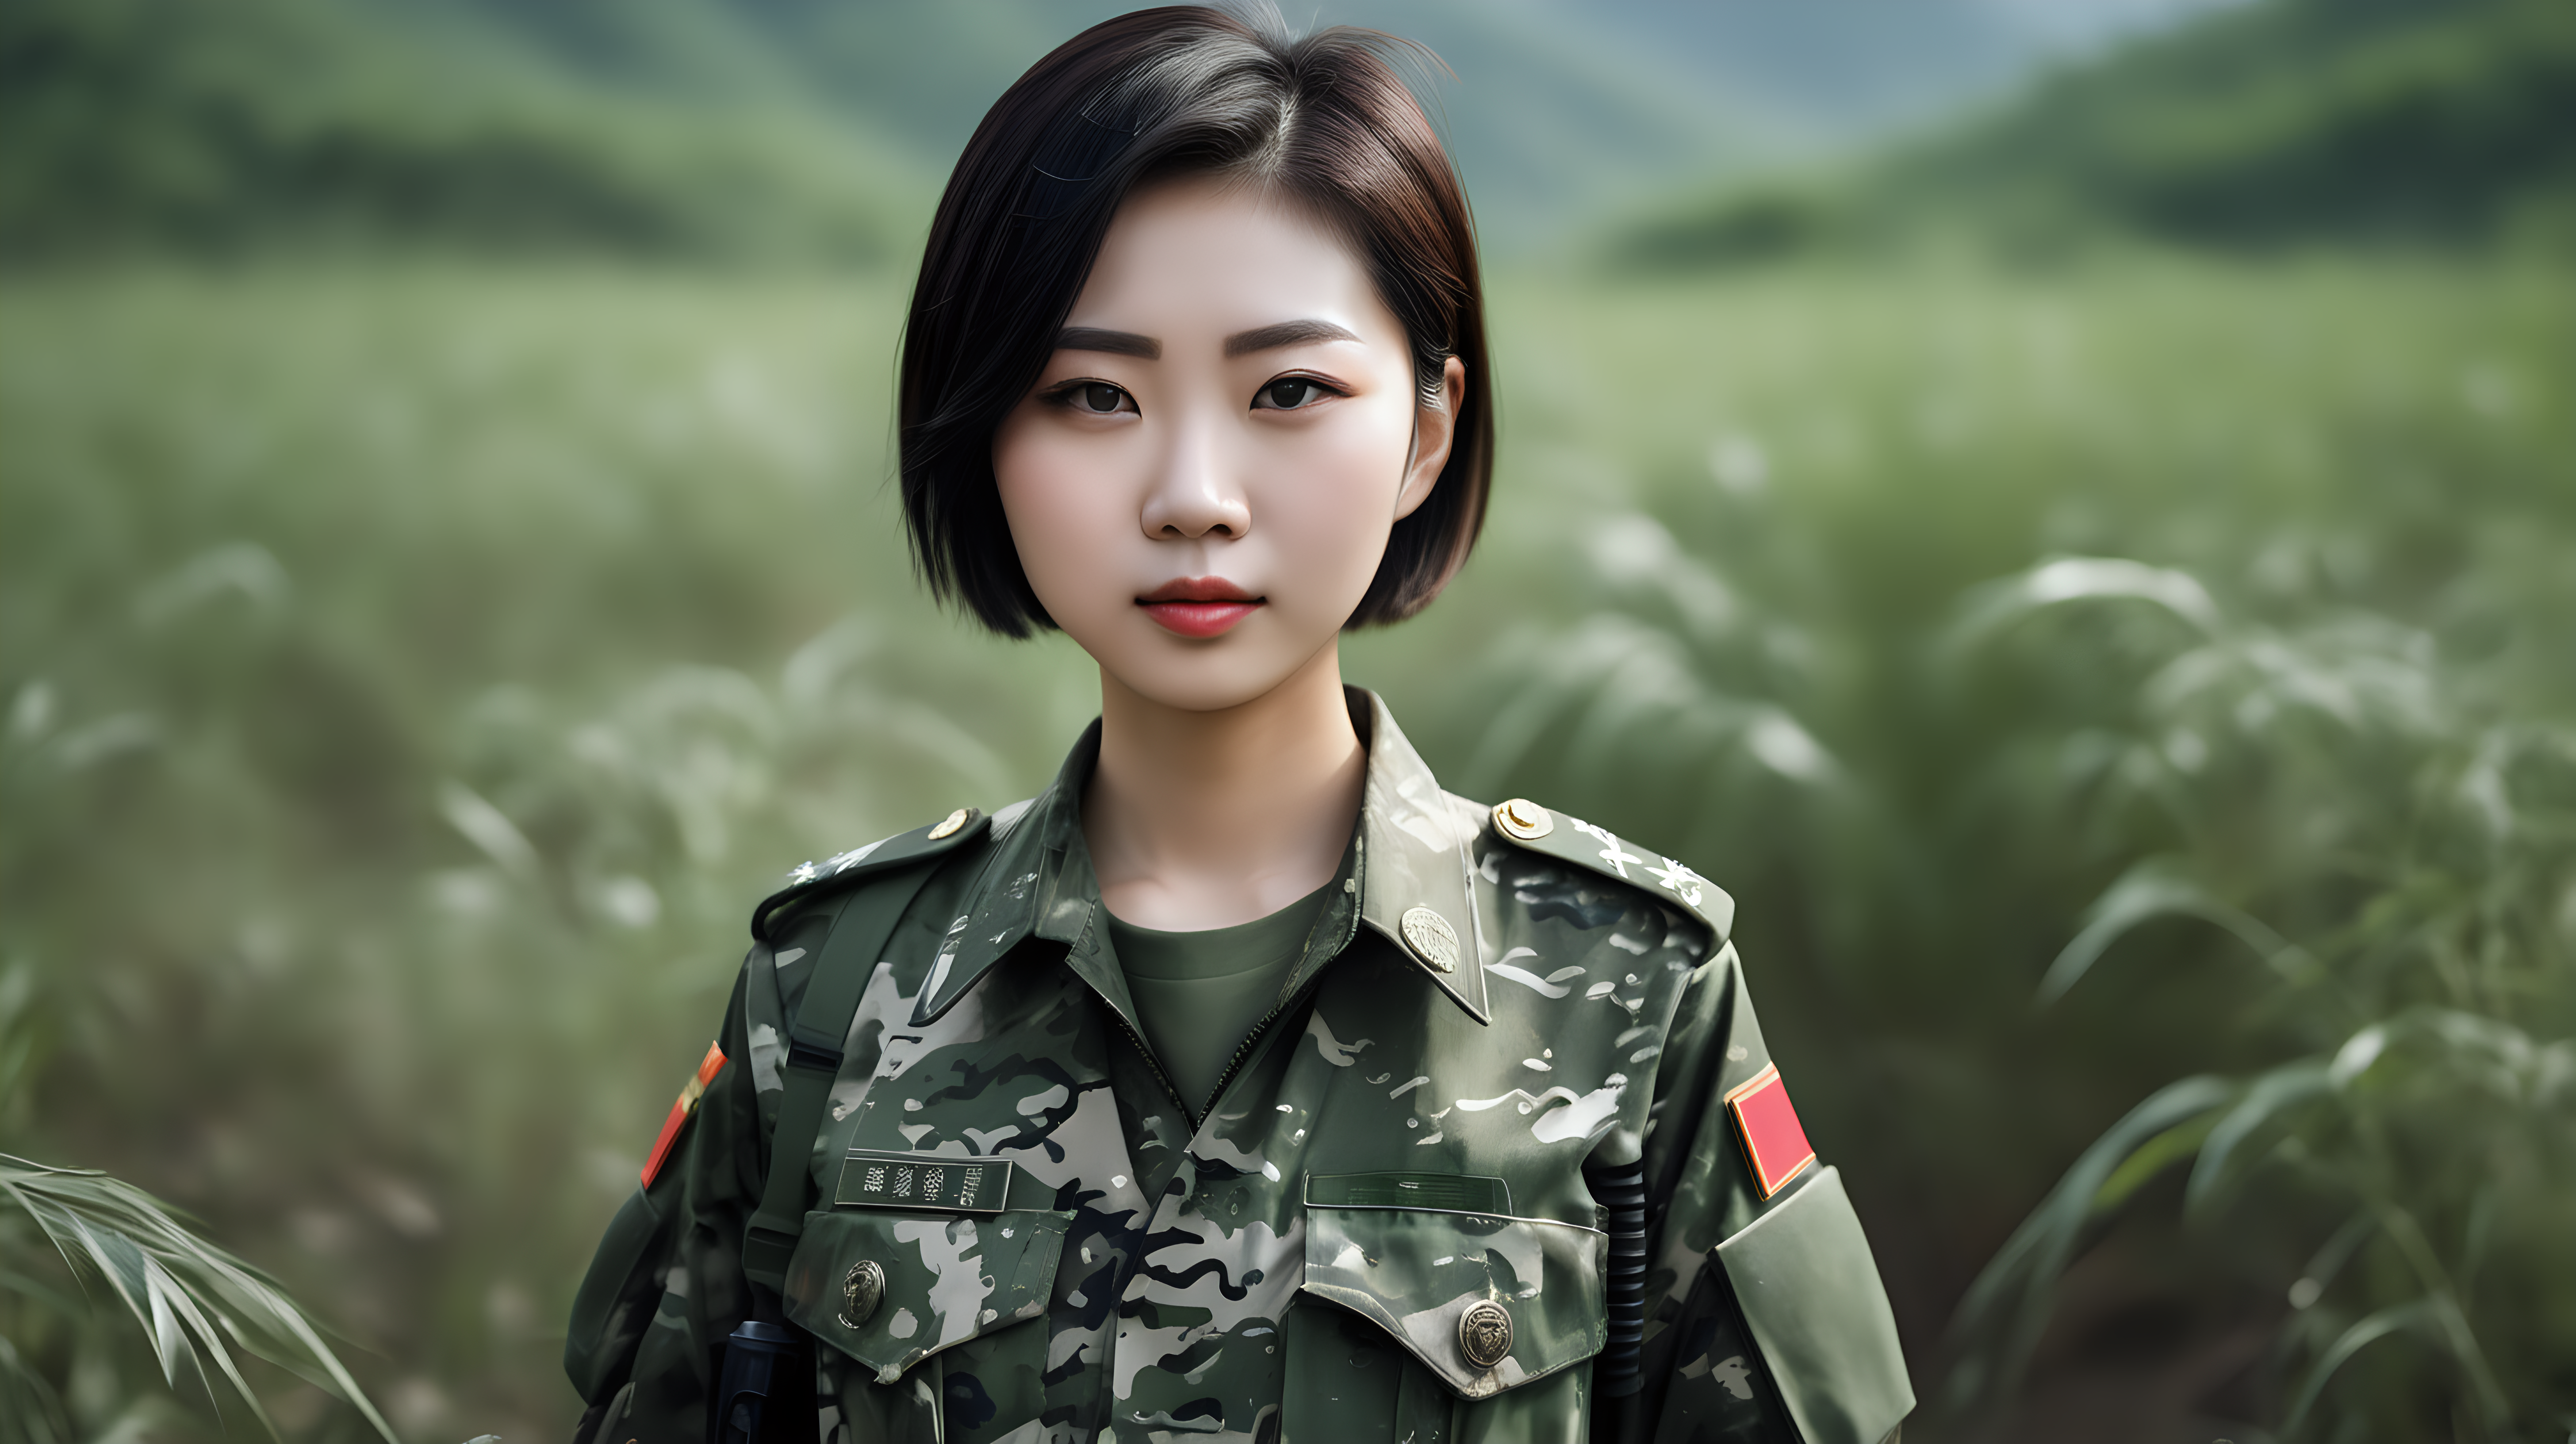 A Chinese female soldierYoung personShort hairLarge chestFrontal faceCamouflage